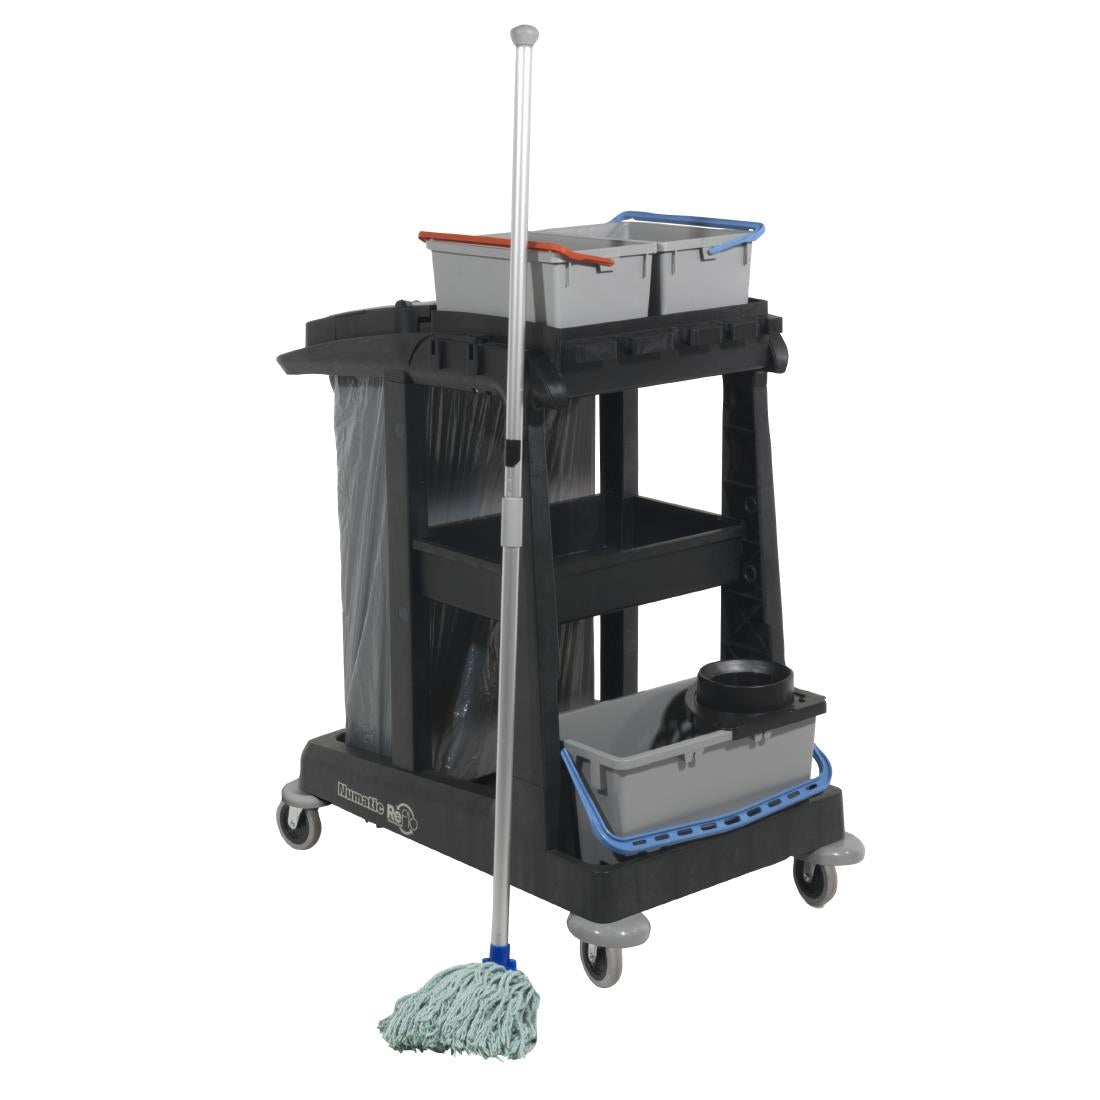 FT110 ECO-Matic Cleaning Trolley EM-1TM JD Catering Equipment Solutions Ltd